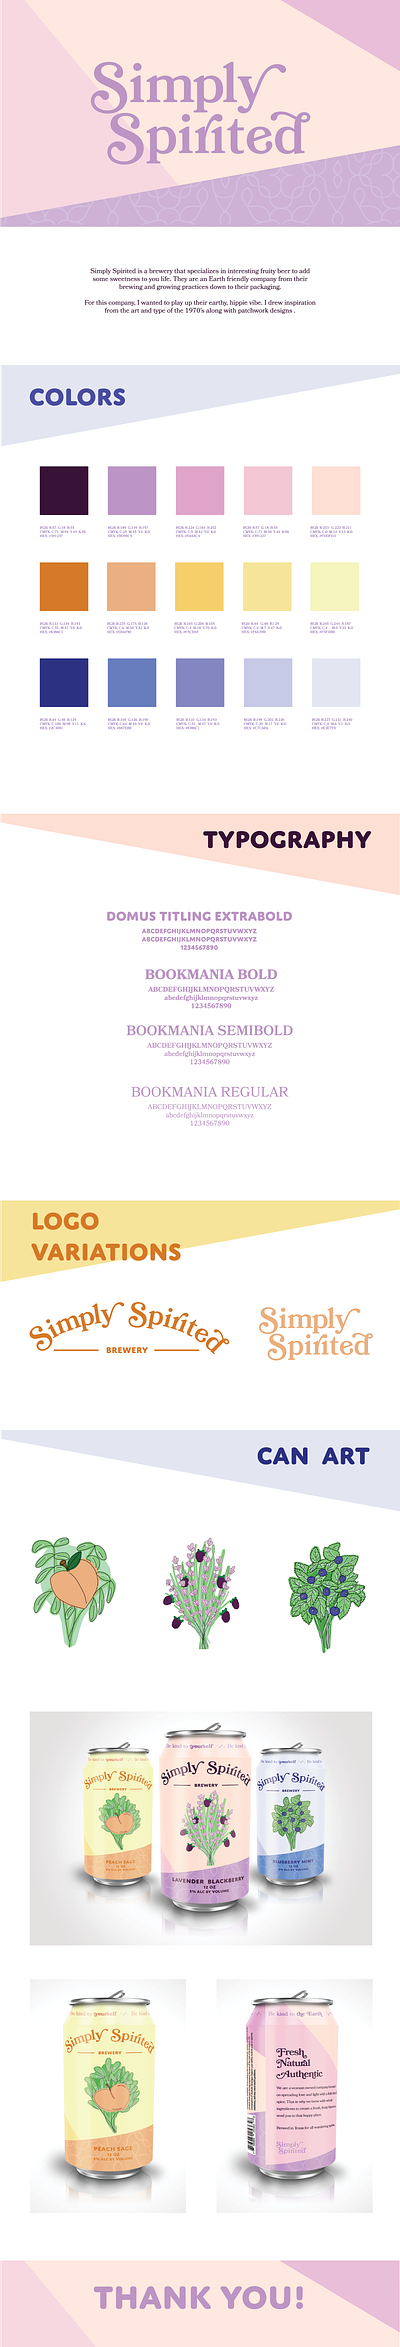 Simply Spirited Brewery branding branding design can design graphic design icon identity systems logo packaging typography visual